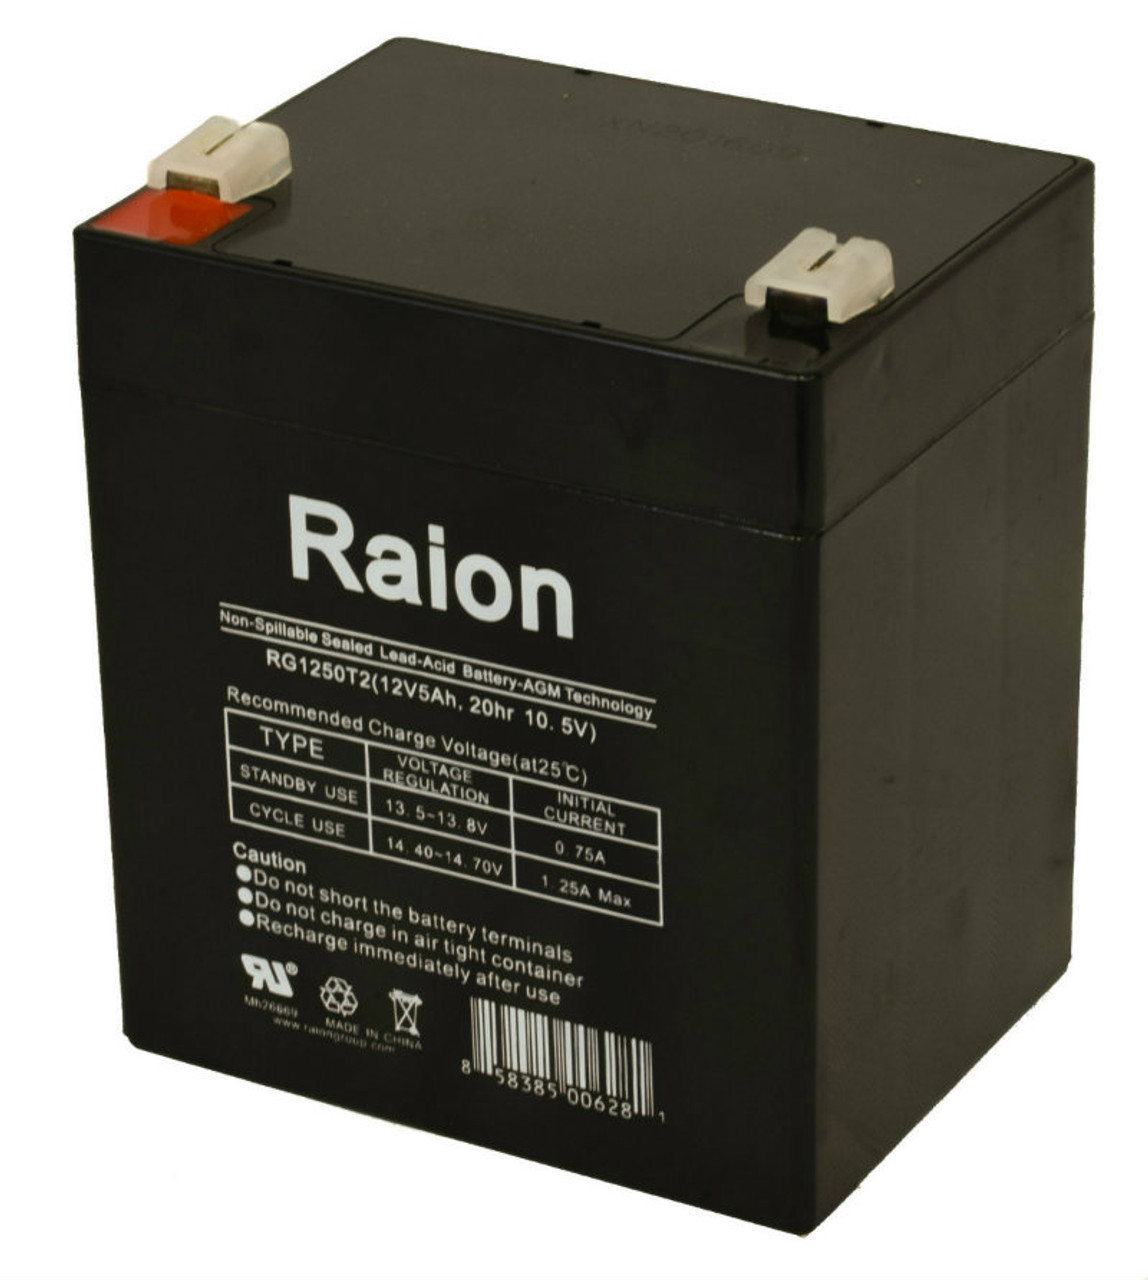 Raion Power RG1250T1 Replacement Alarm Security System Battery for GE Security B-1245